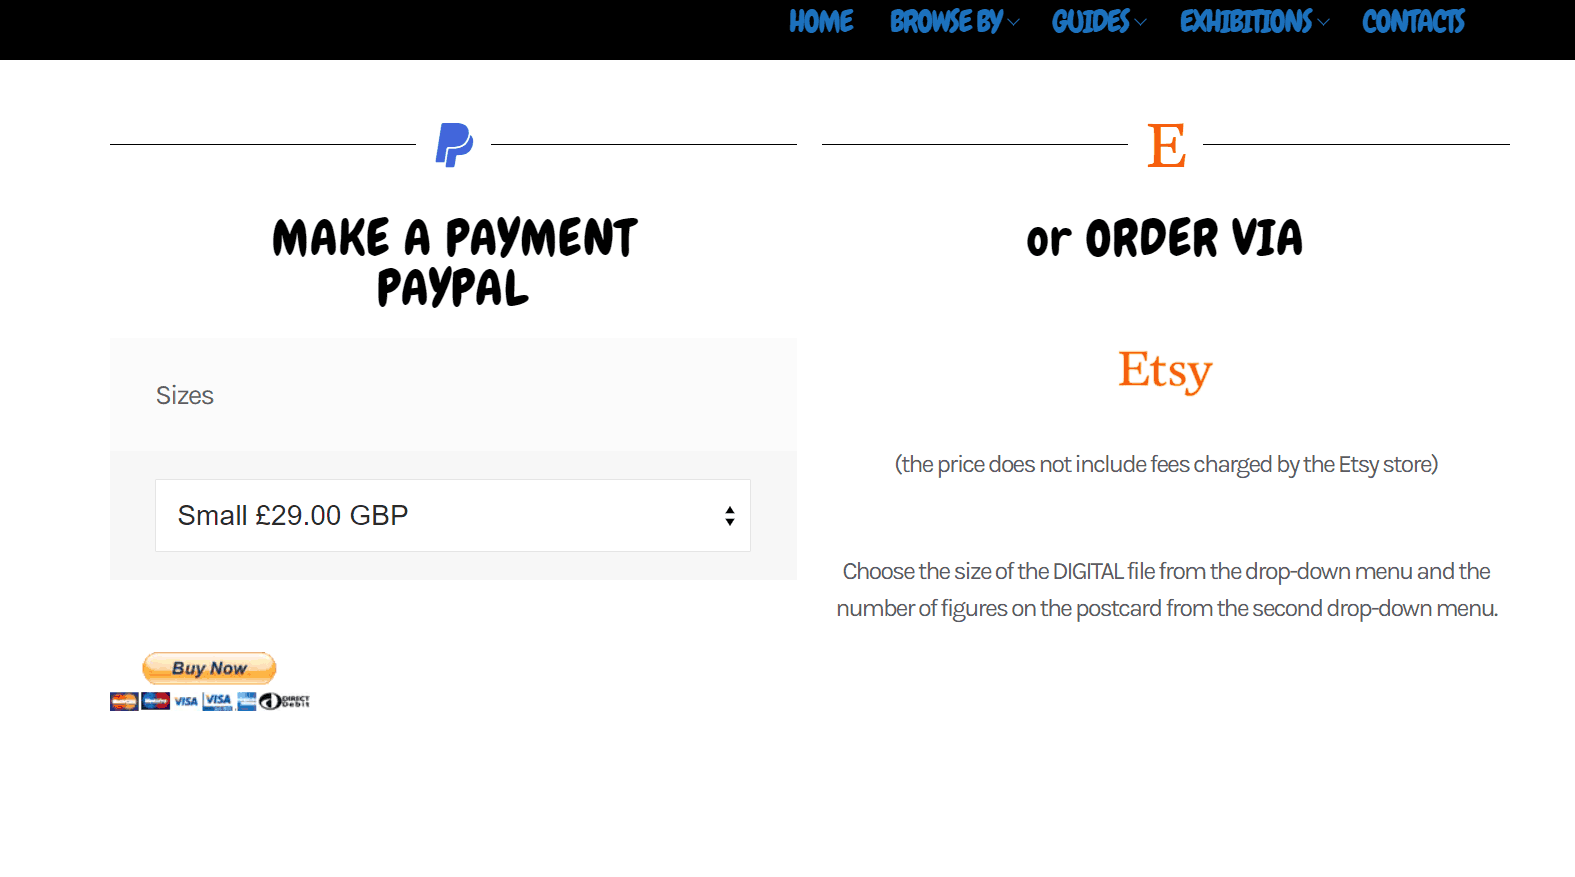 How to make a payment 2